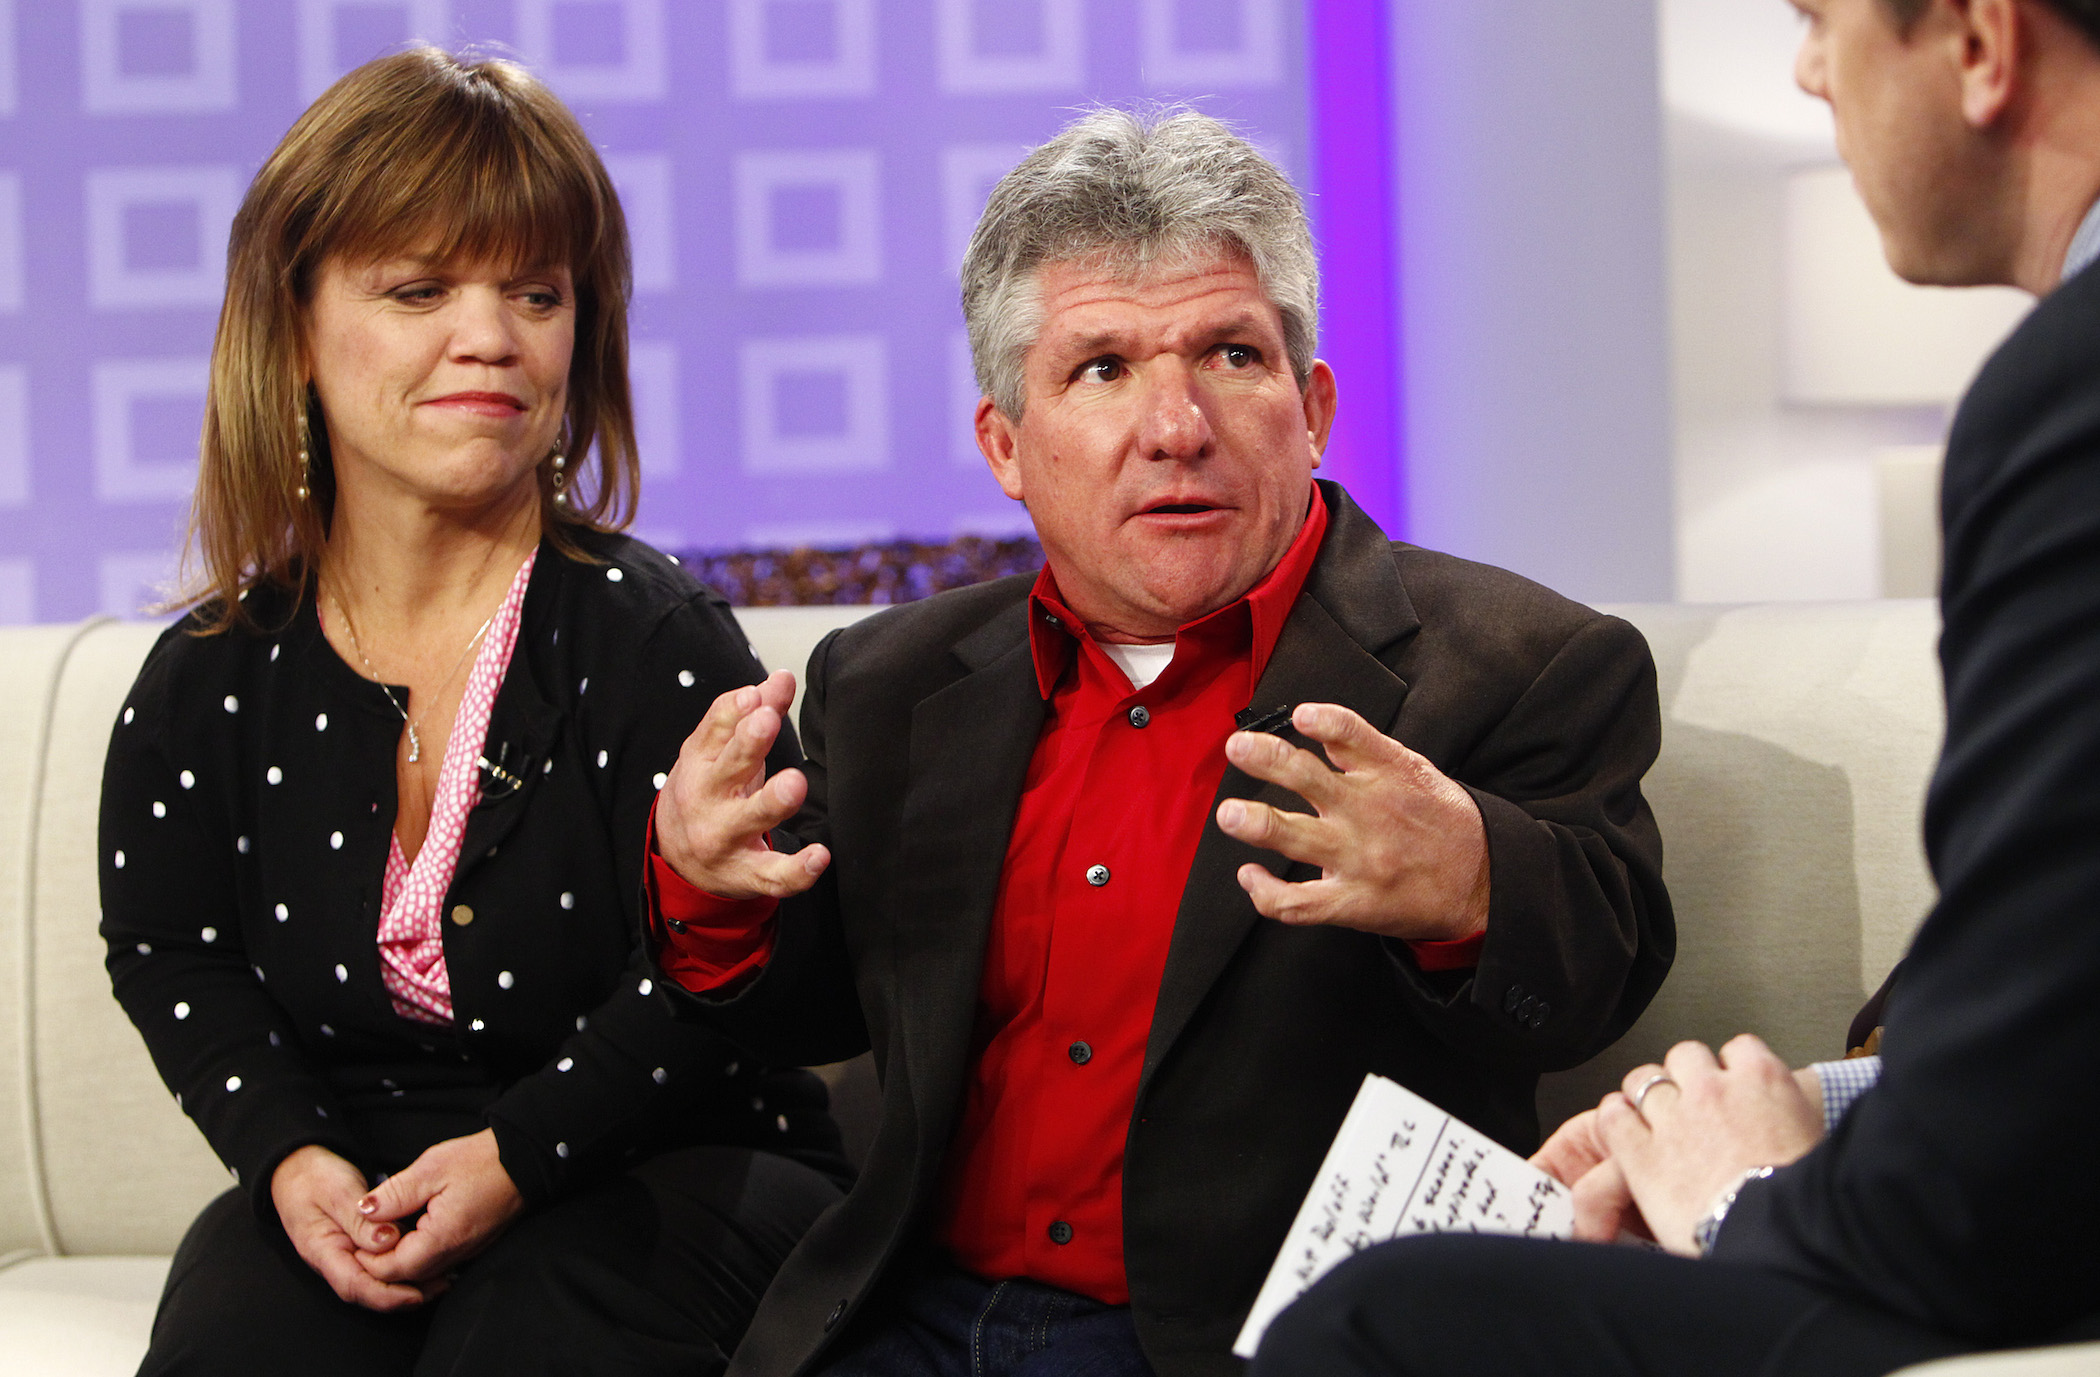 Amy Roloff and Matt Roloff, members of the Roloff family from 'Little People, Big World' sitting next to each other and talking on NBC News' 'Today' show